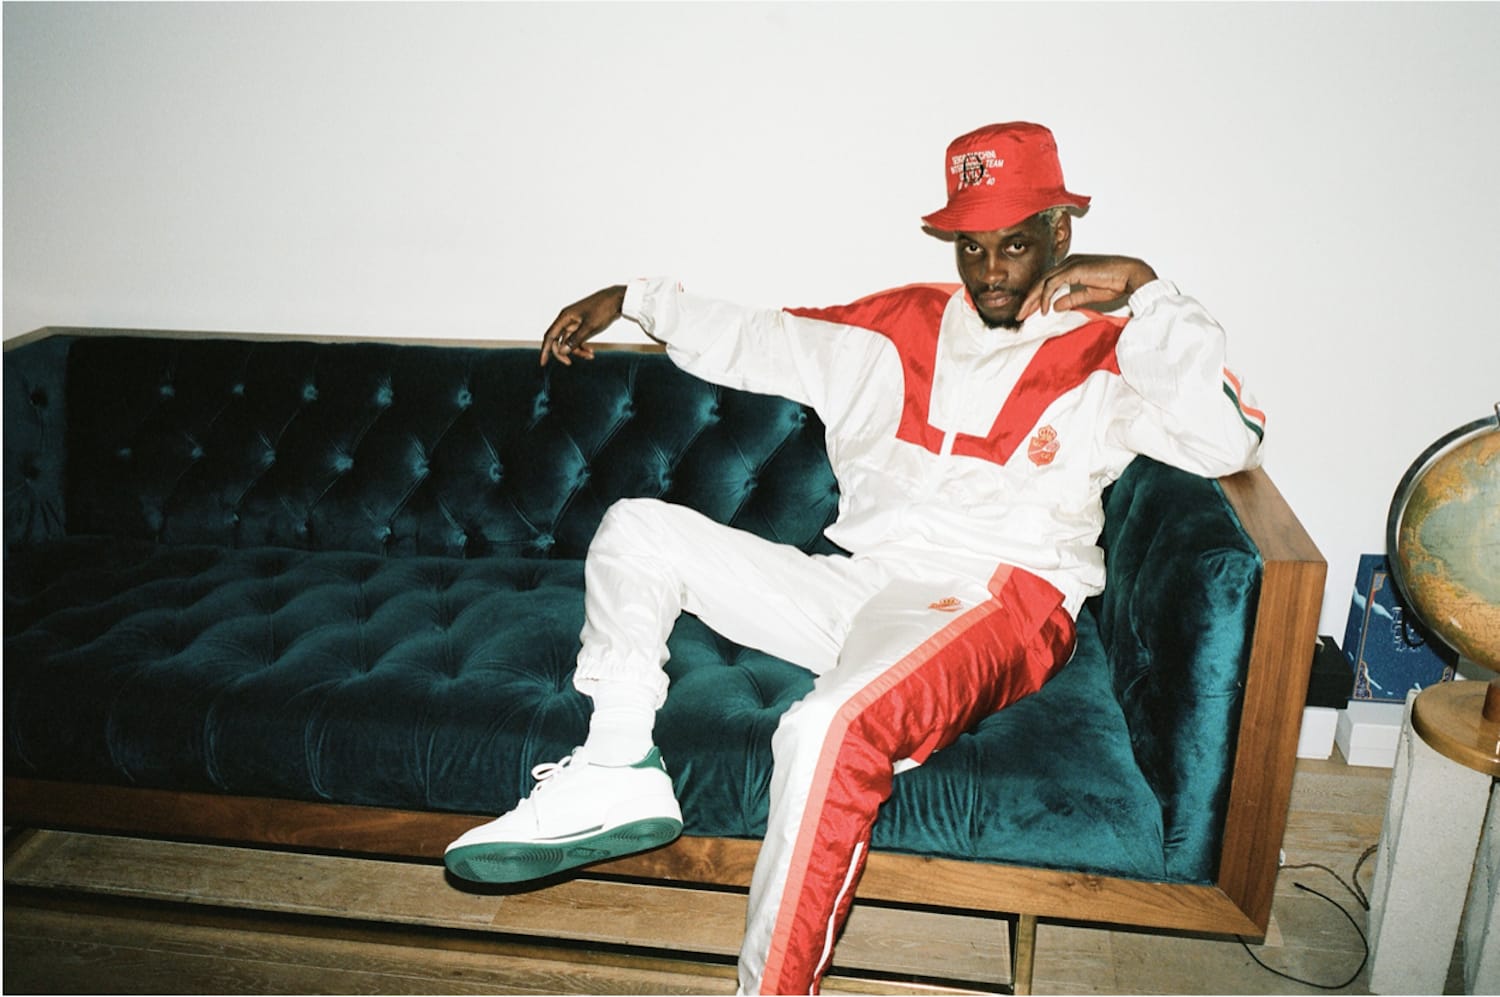 Spring/Summer ‘21 Collection Featuring A$AP Nast – Sergio Tacchini